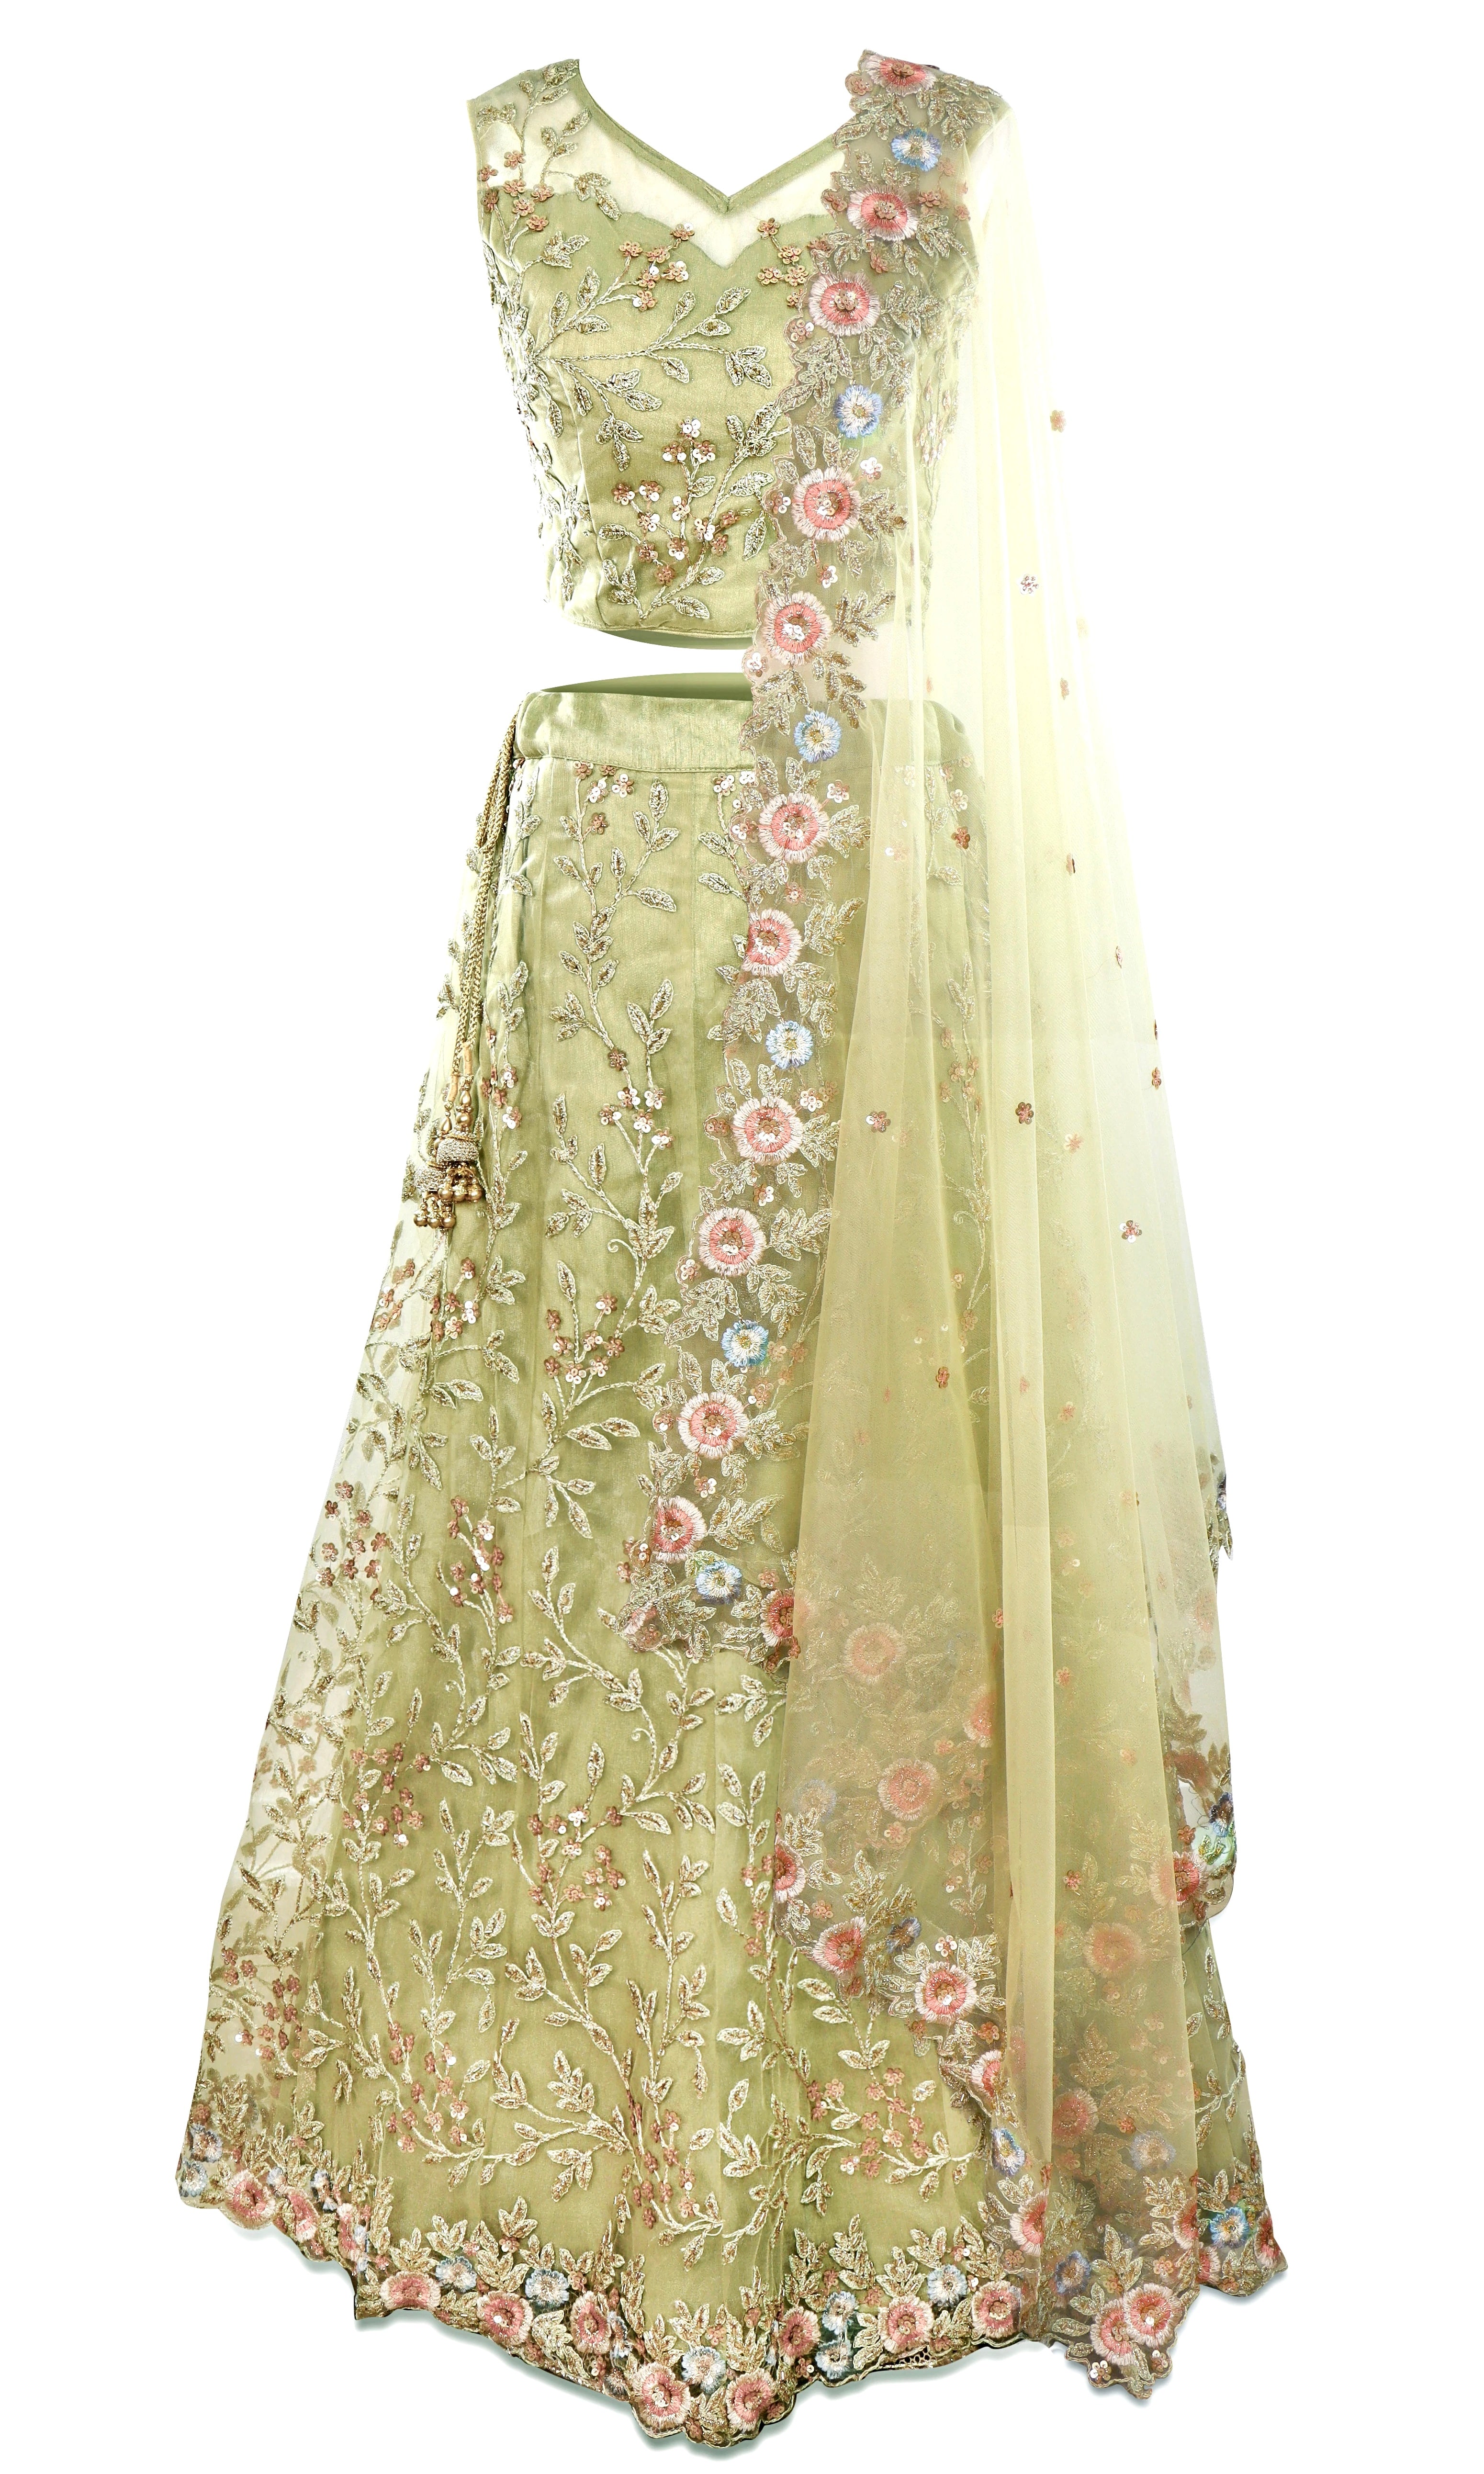 Green Lehenga and decked out with beautiful rose gold and champagne embroidery and sequins.